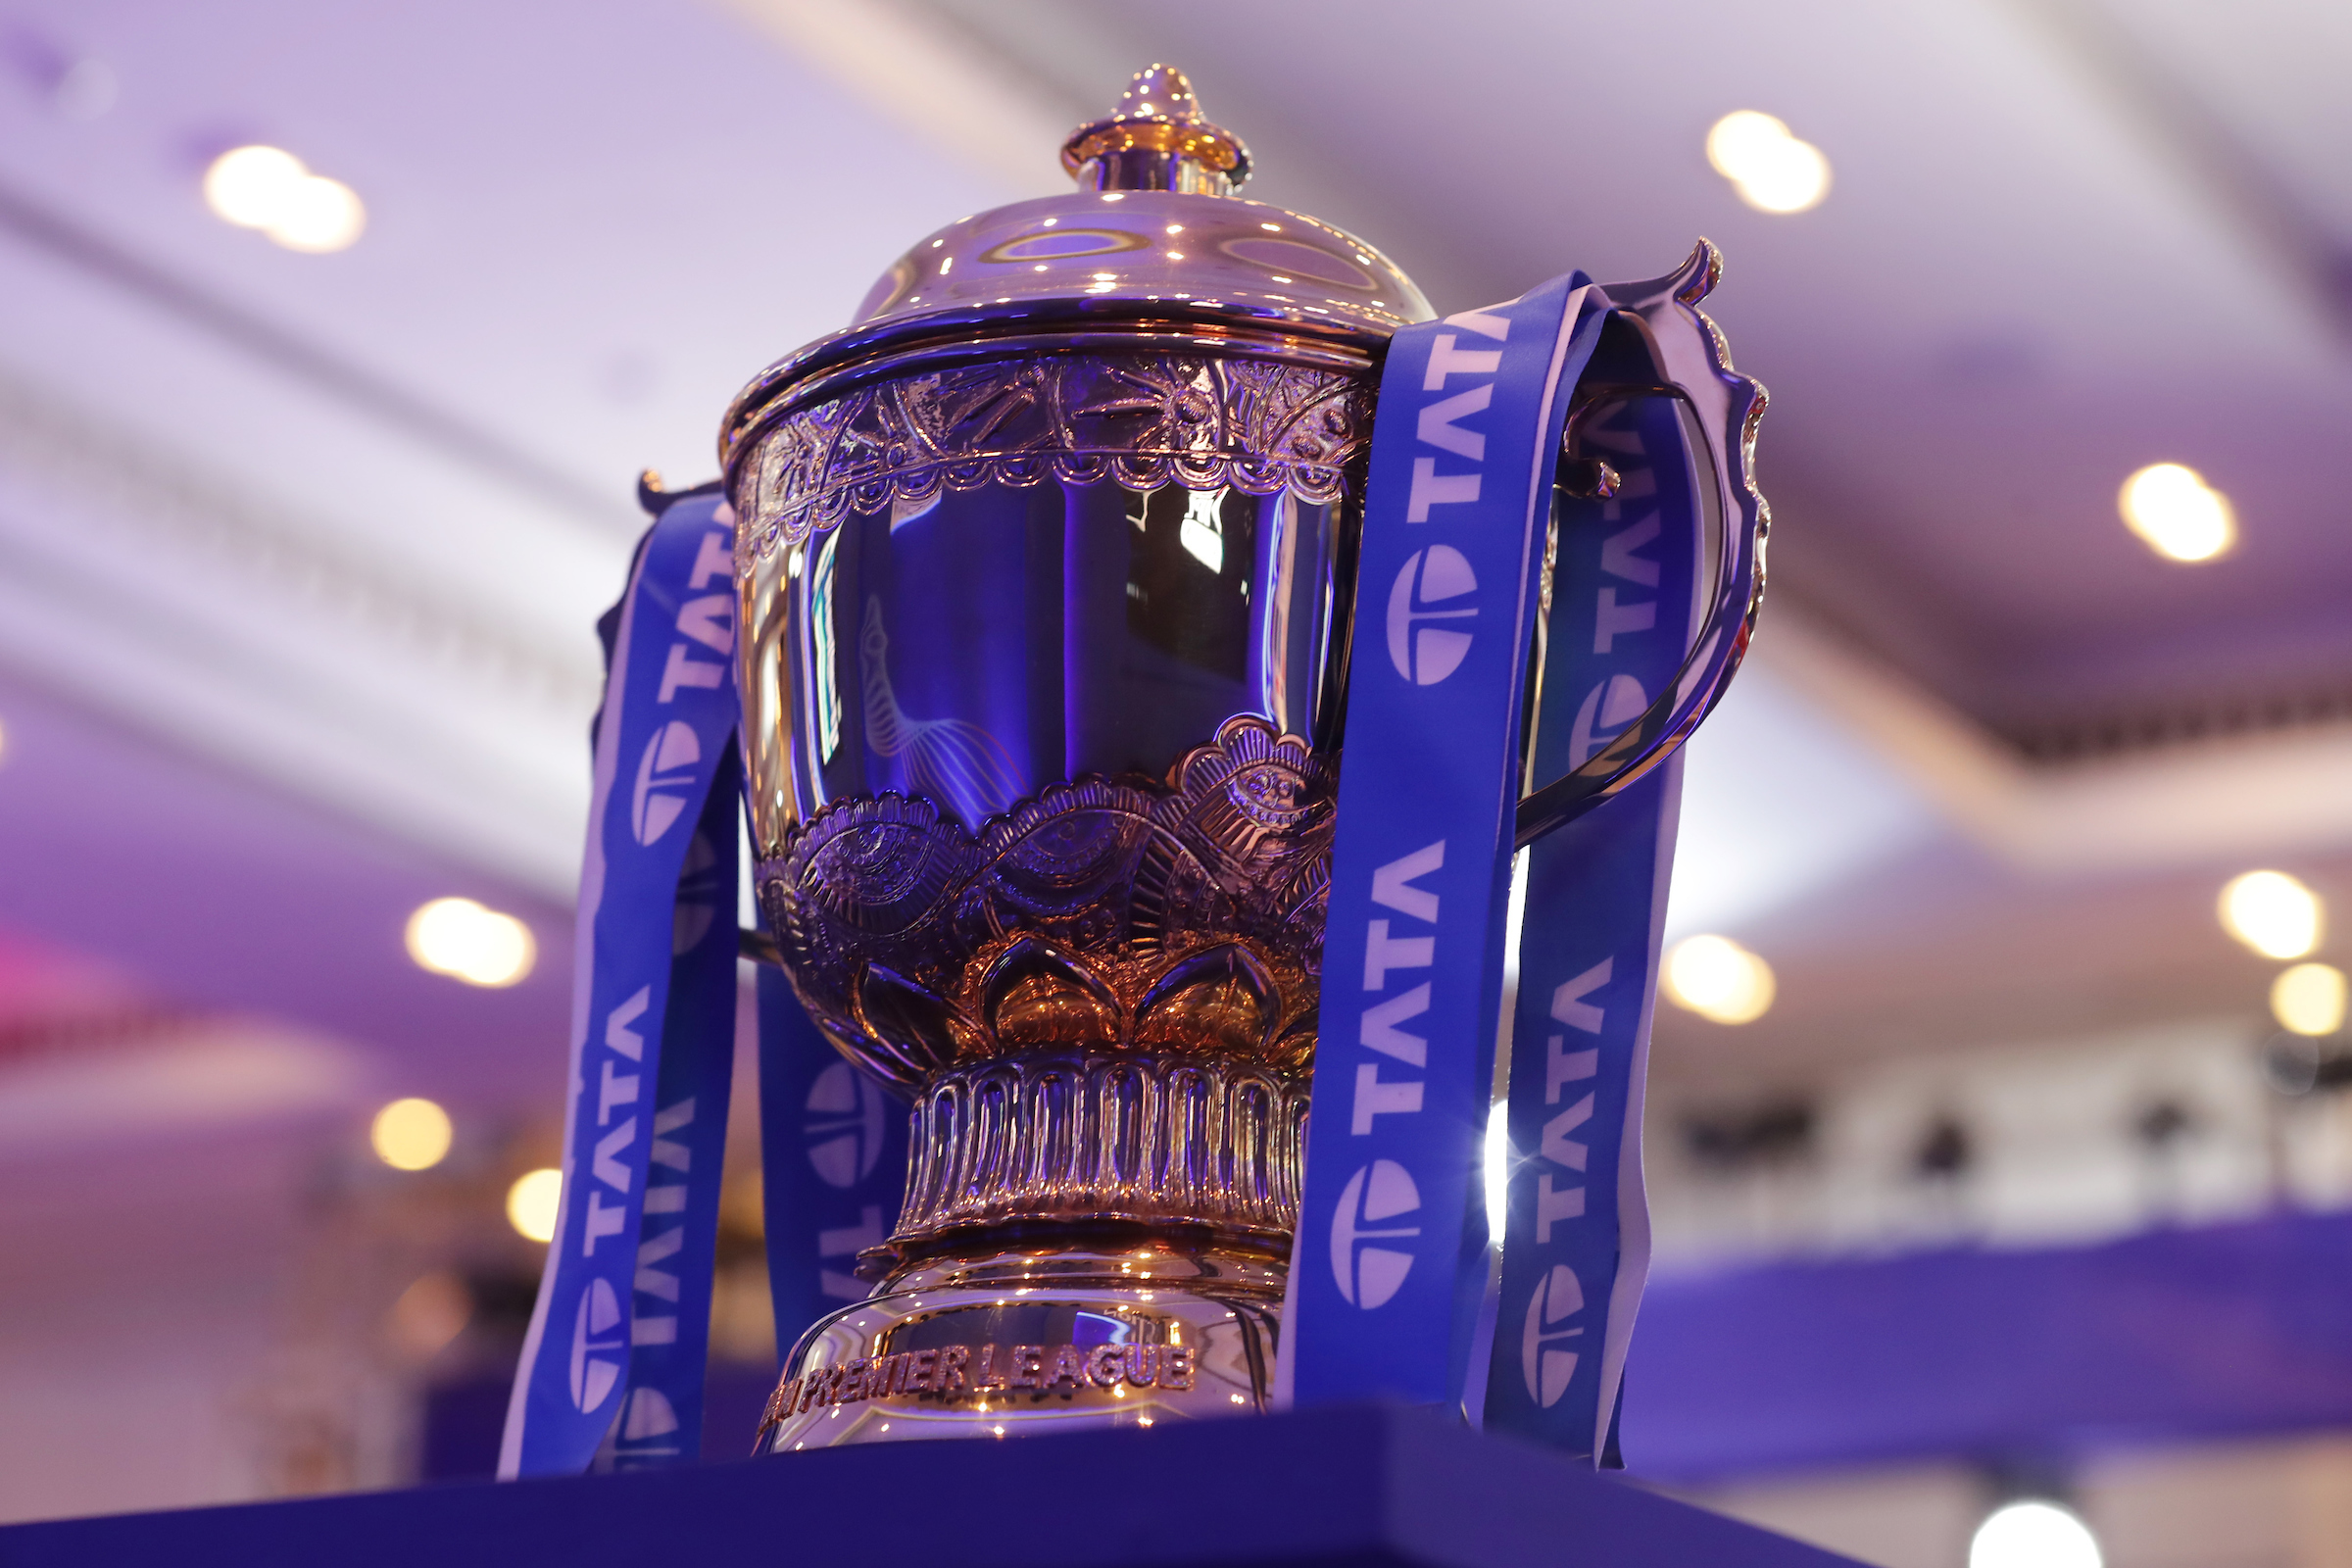 Media rights for IPL 2023-2027 seasons were sold for a total of INR 48,390 crores | BCCI